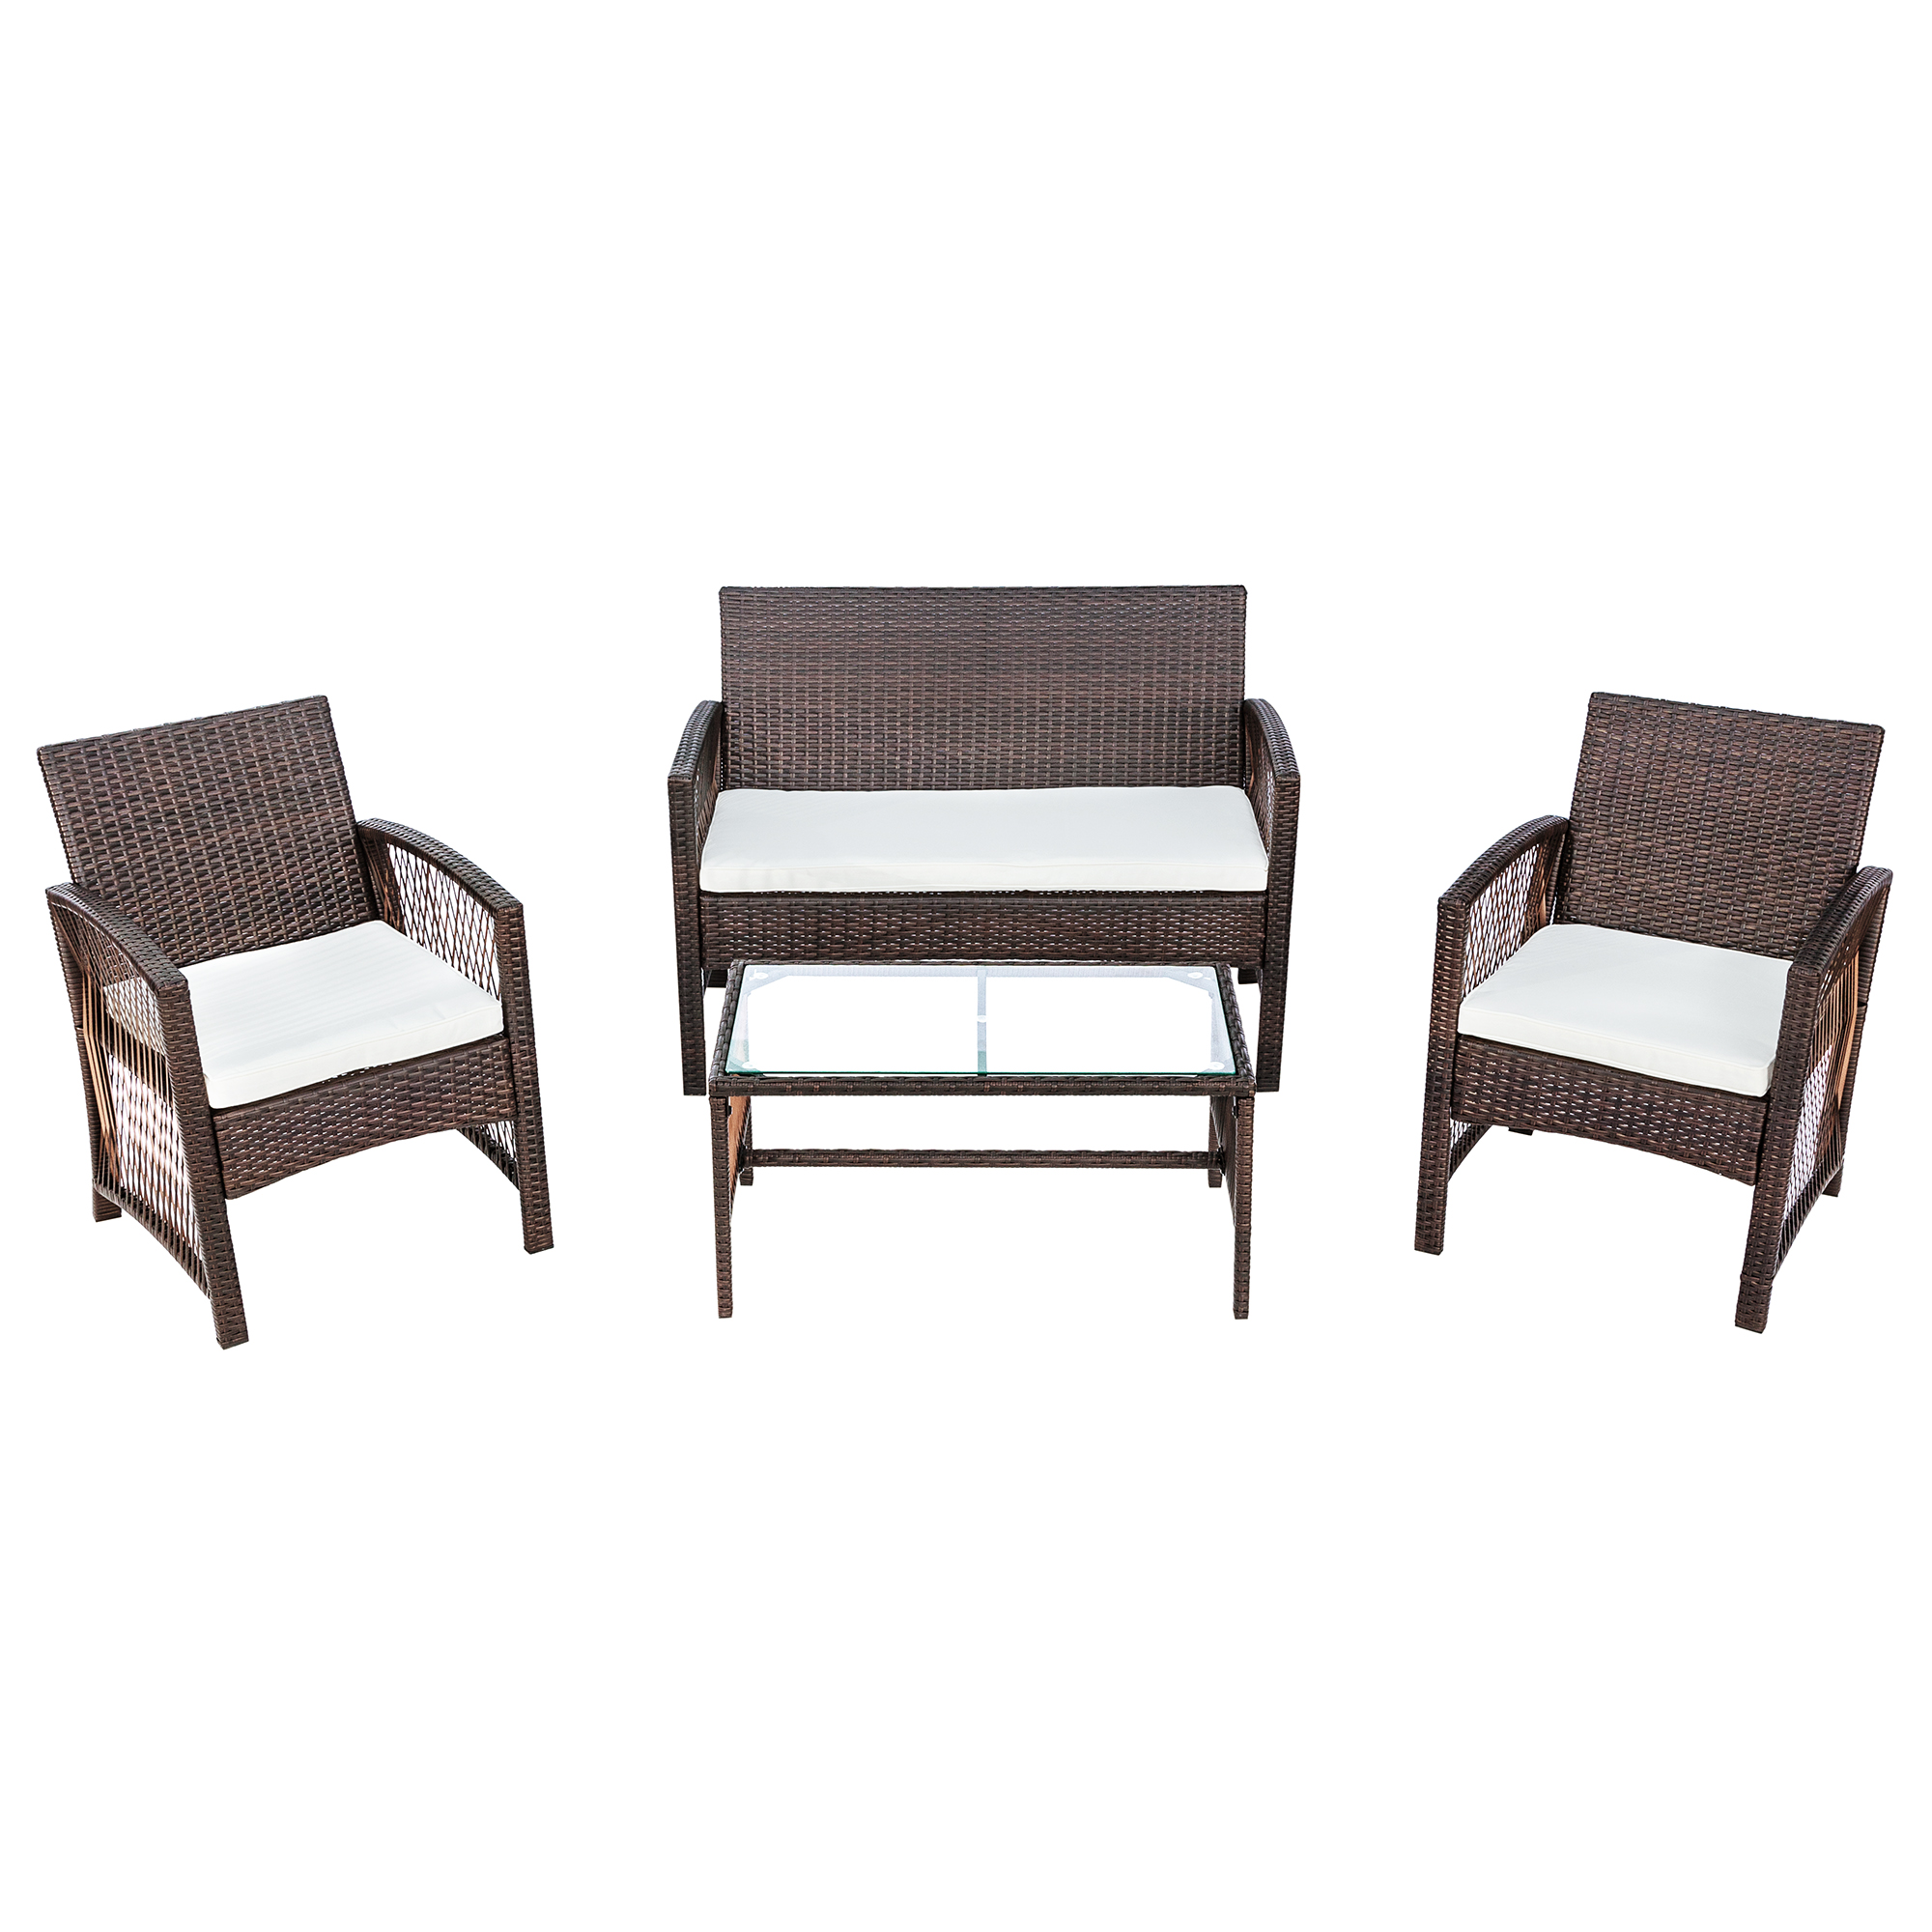 4 Piece Bistro Patio Set, Rattan Wicker Outdoor Patio Furniture Dining Sets, 2pcs Arm Chairs 1pc Love Seat&Coffee Table, Outdoor Conversation Sets for Backyard Poolside Garden, Brown, W7783 - image 5 of 11